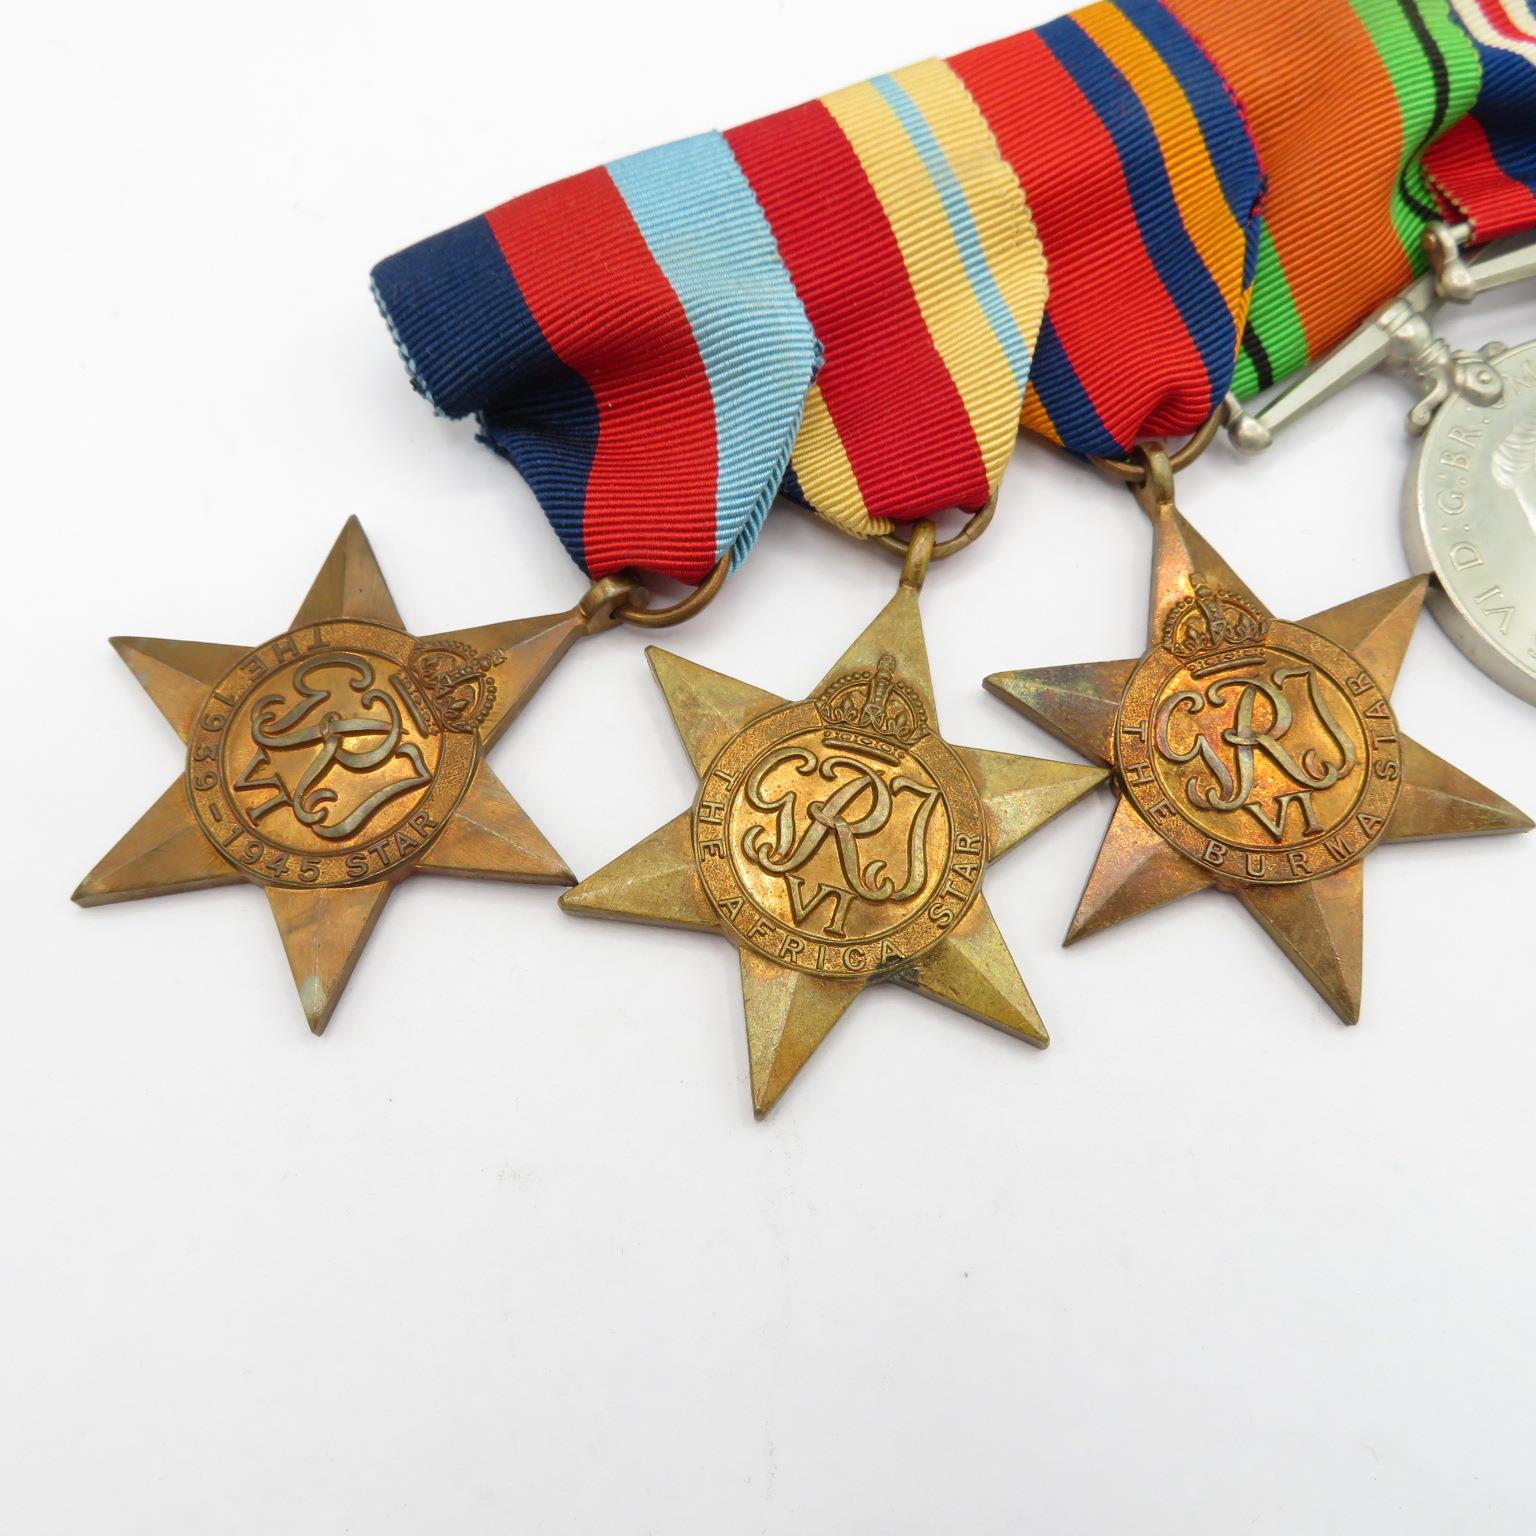 Selection of 7 medals all on one bar including Korea medal. - Image 2 of 7